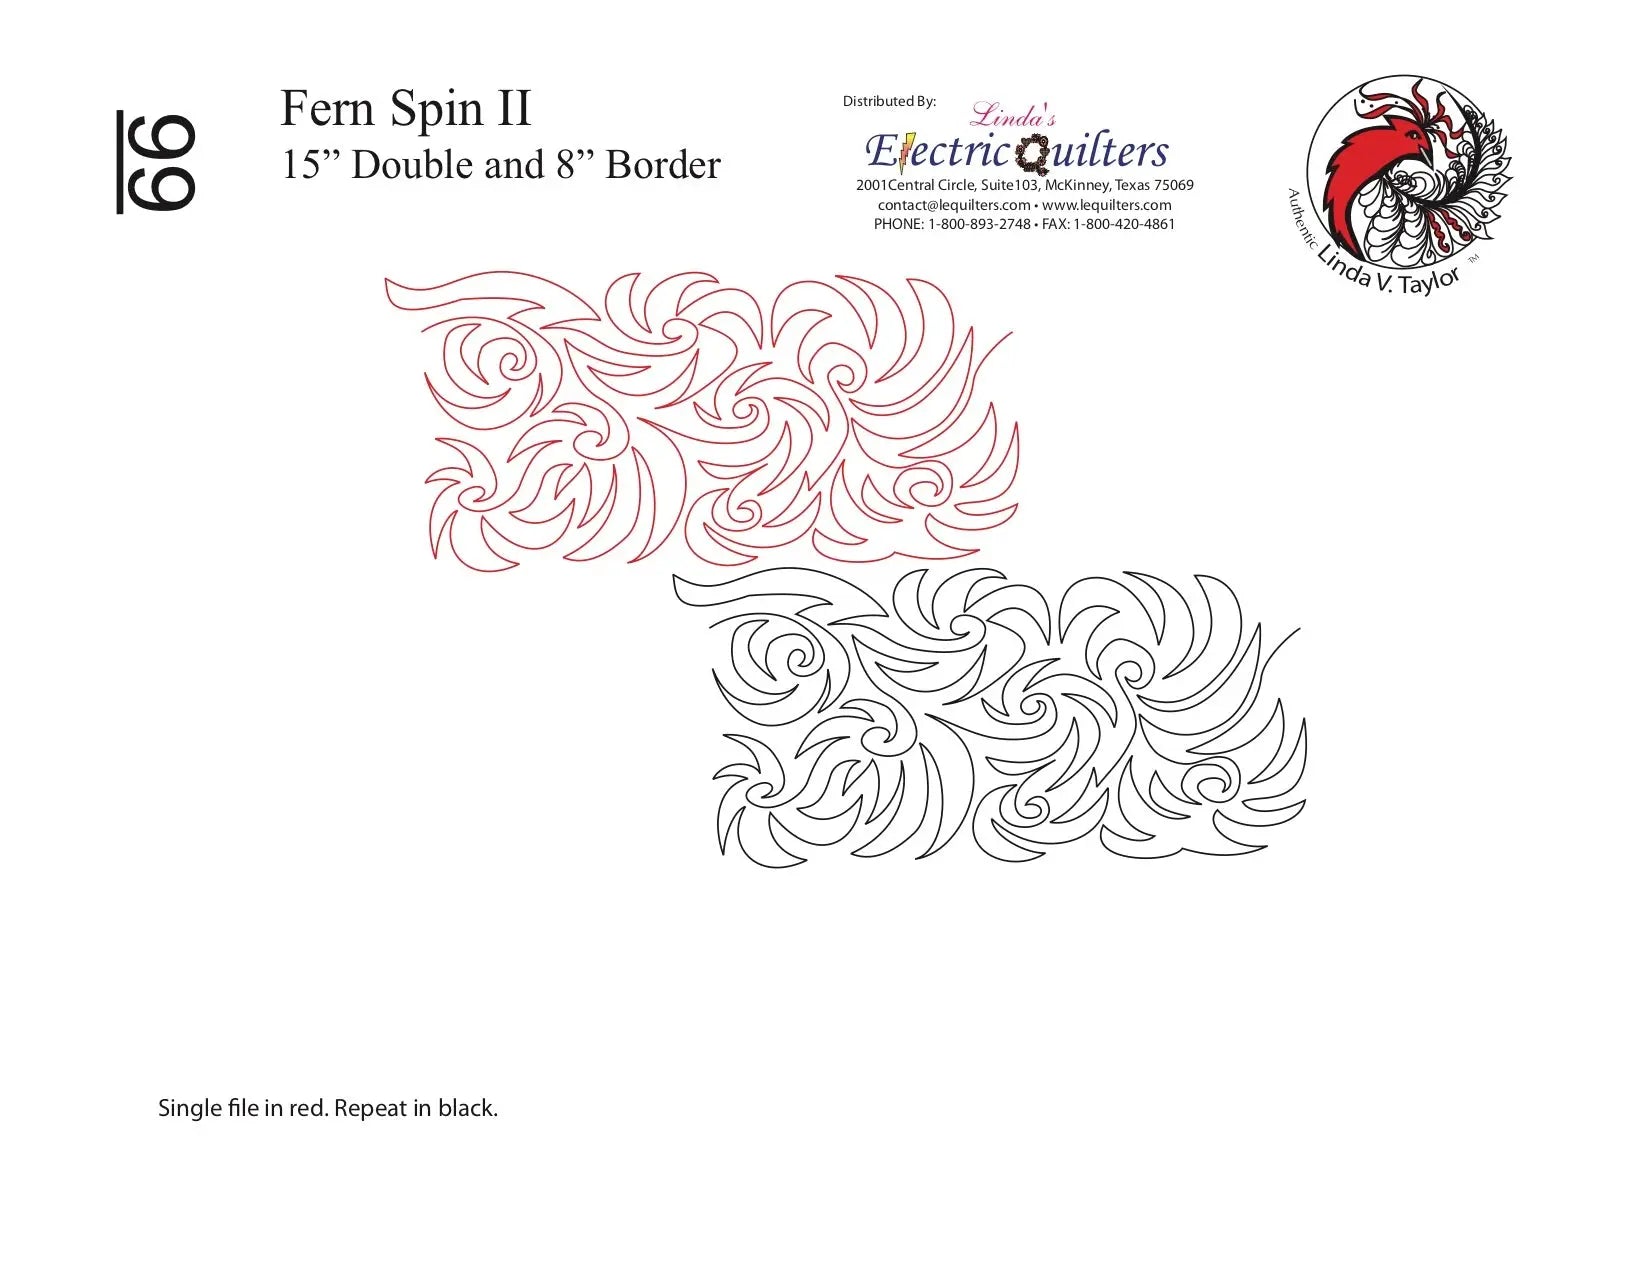 099 Fern Spin Pantograph by Linda V. Taylor - Linda's Electric Quilters